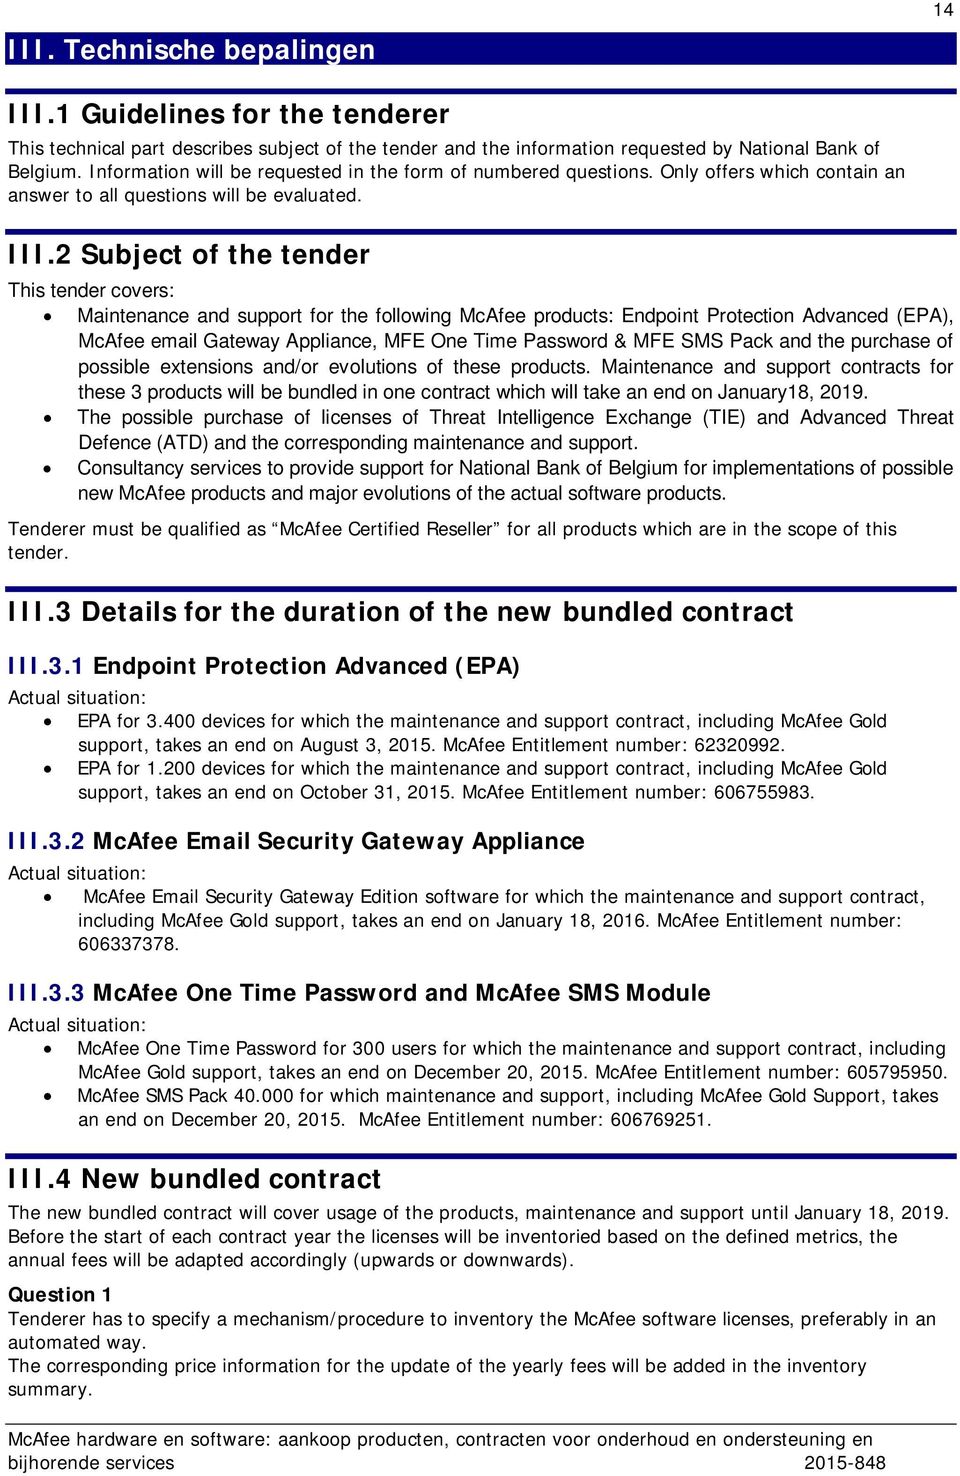 2 Subject of the tender This tender covers: Maintenance and support for the following McAfee products: Endpoint Protection Advanced (EPA), McAfee email Gateway Appliance, MFE One Time Password & MFE